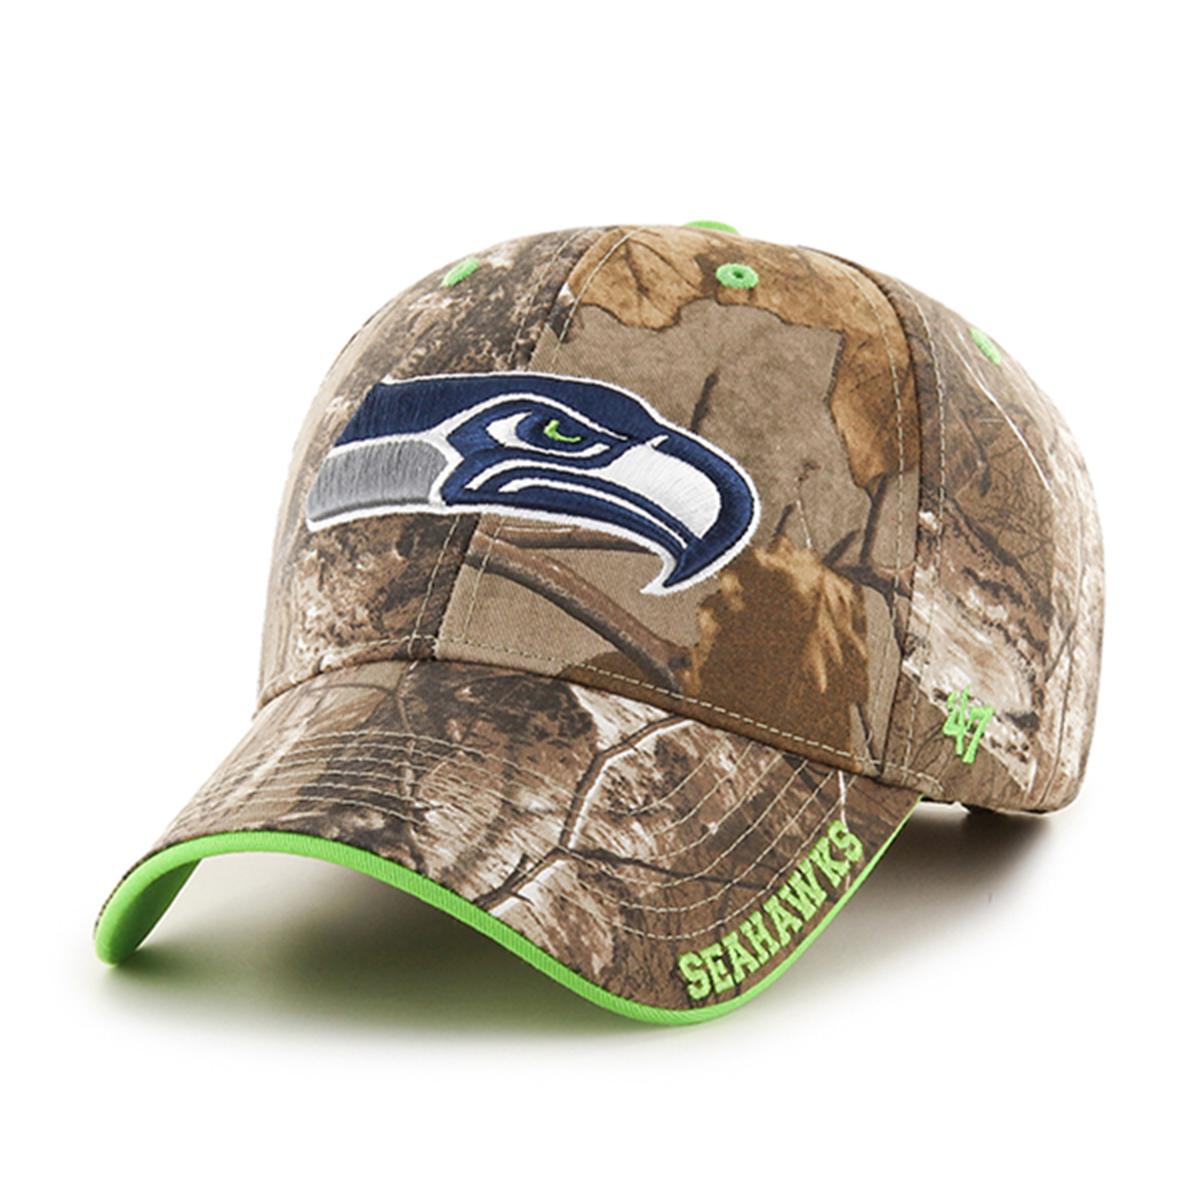 Officially Licensed NFL 47 Brand Men's Camo Hat - Rams